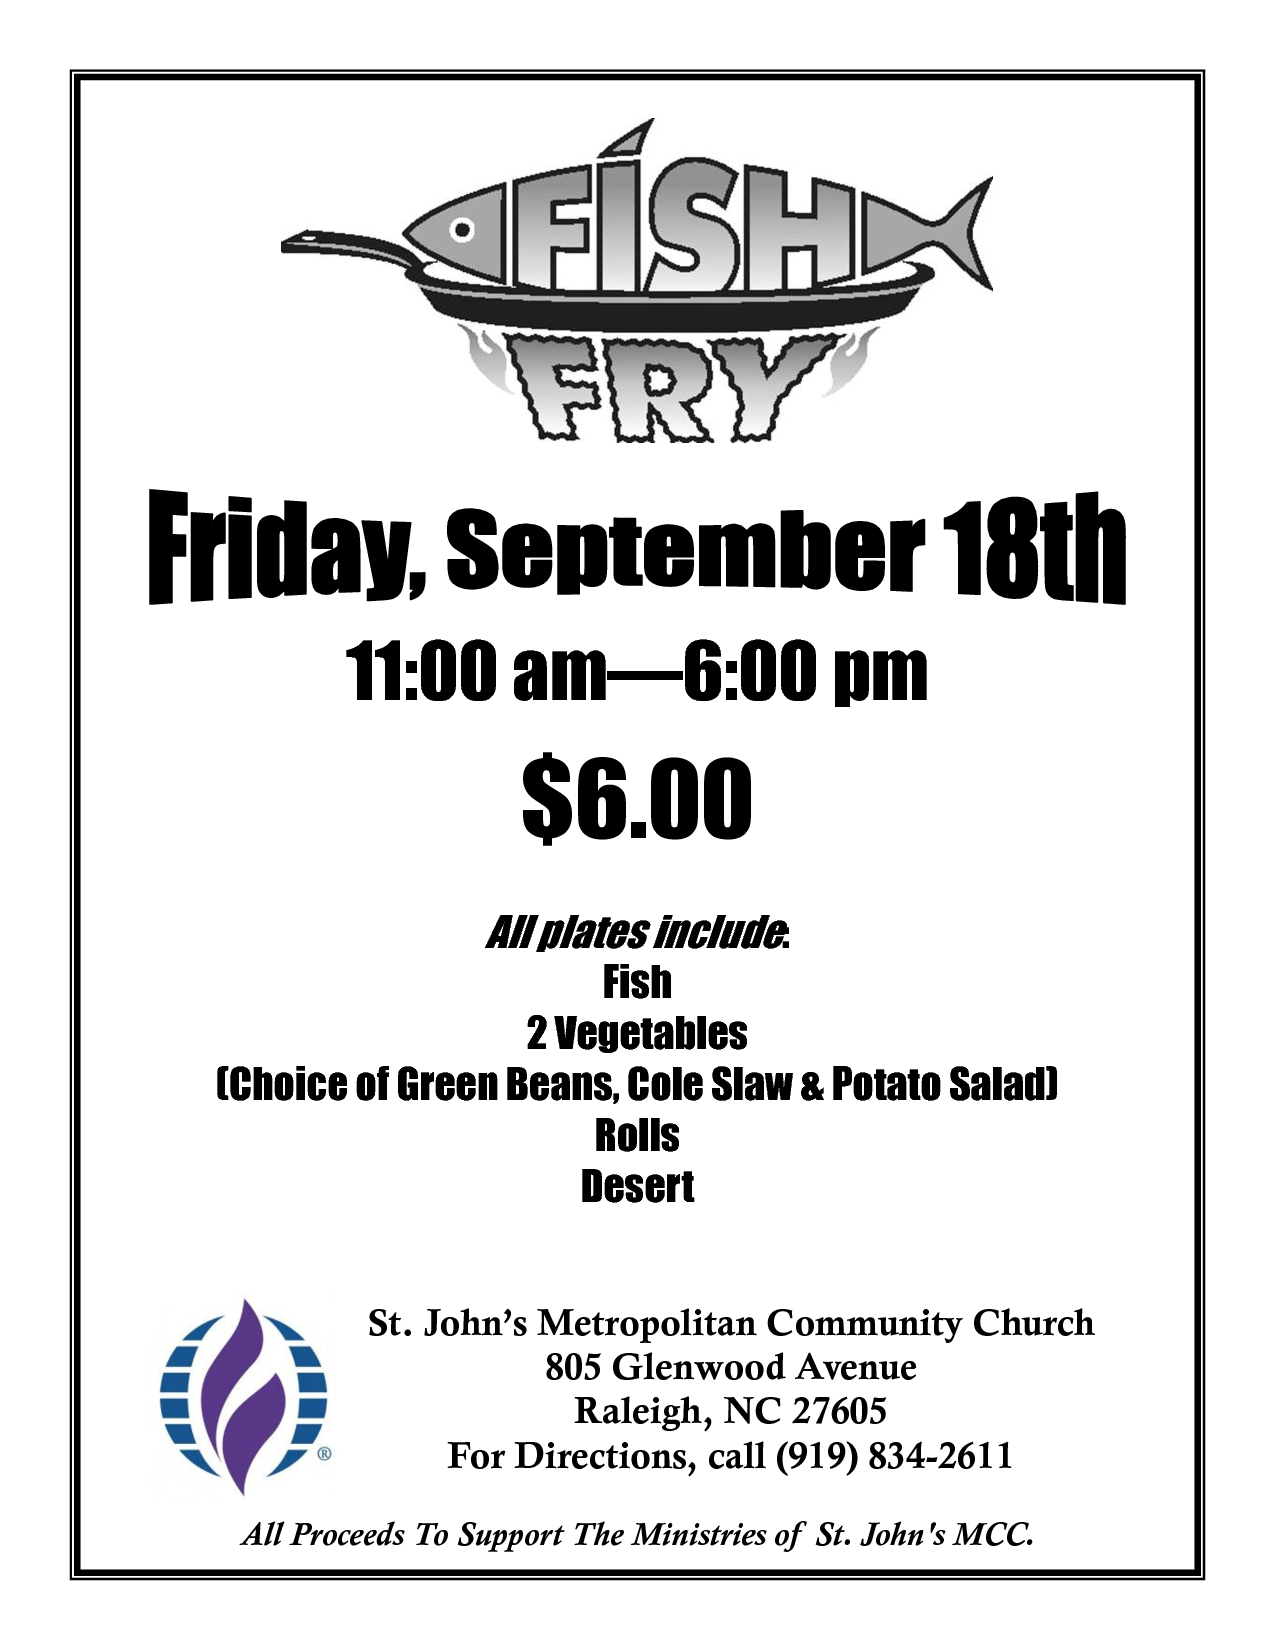 Free Fish-Fry Flyer Templates | Fish Fry Poster | Fish Fry | Fried - Free Printable Flyers For Church